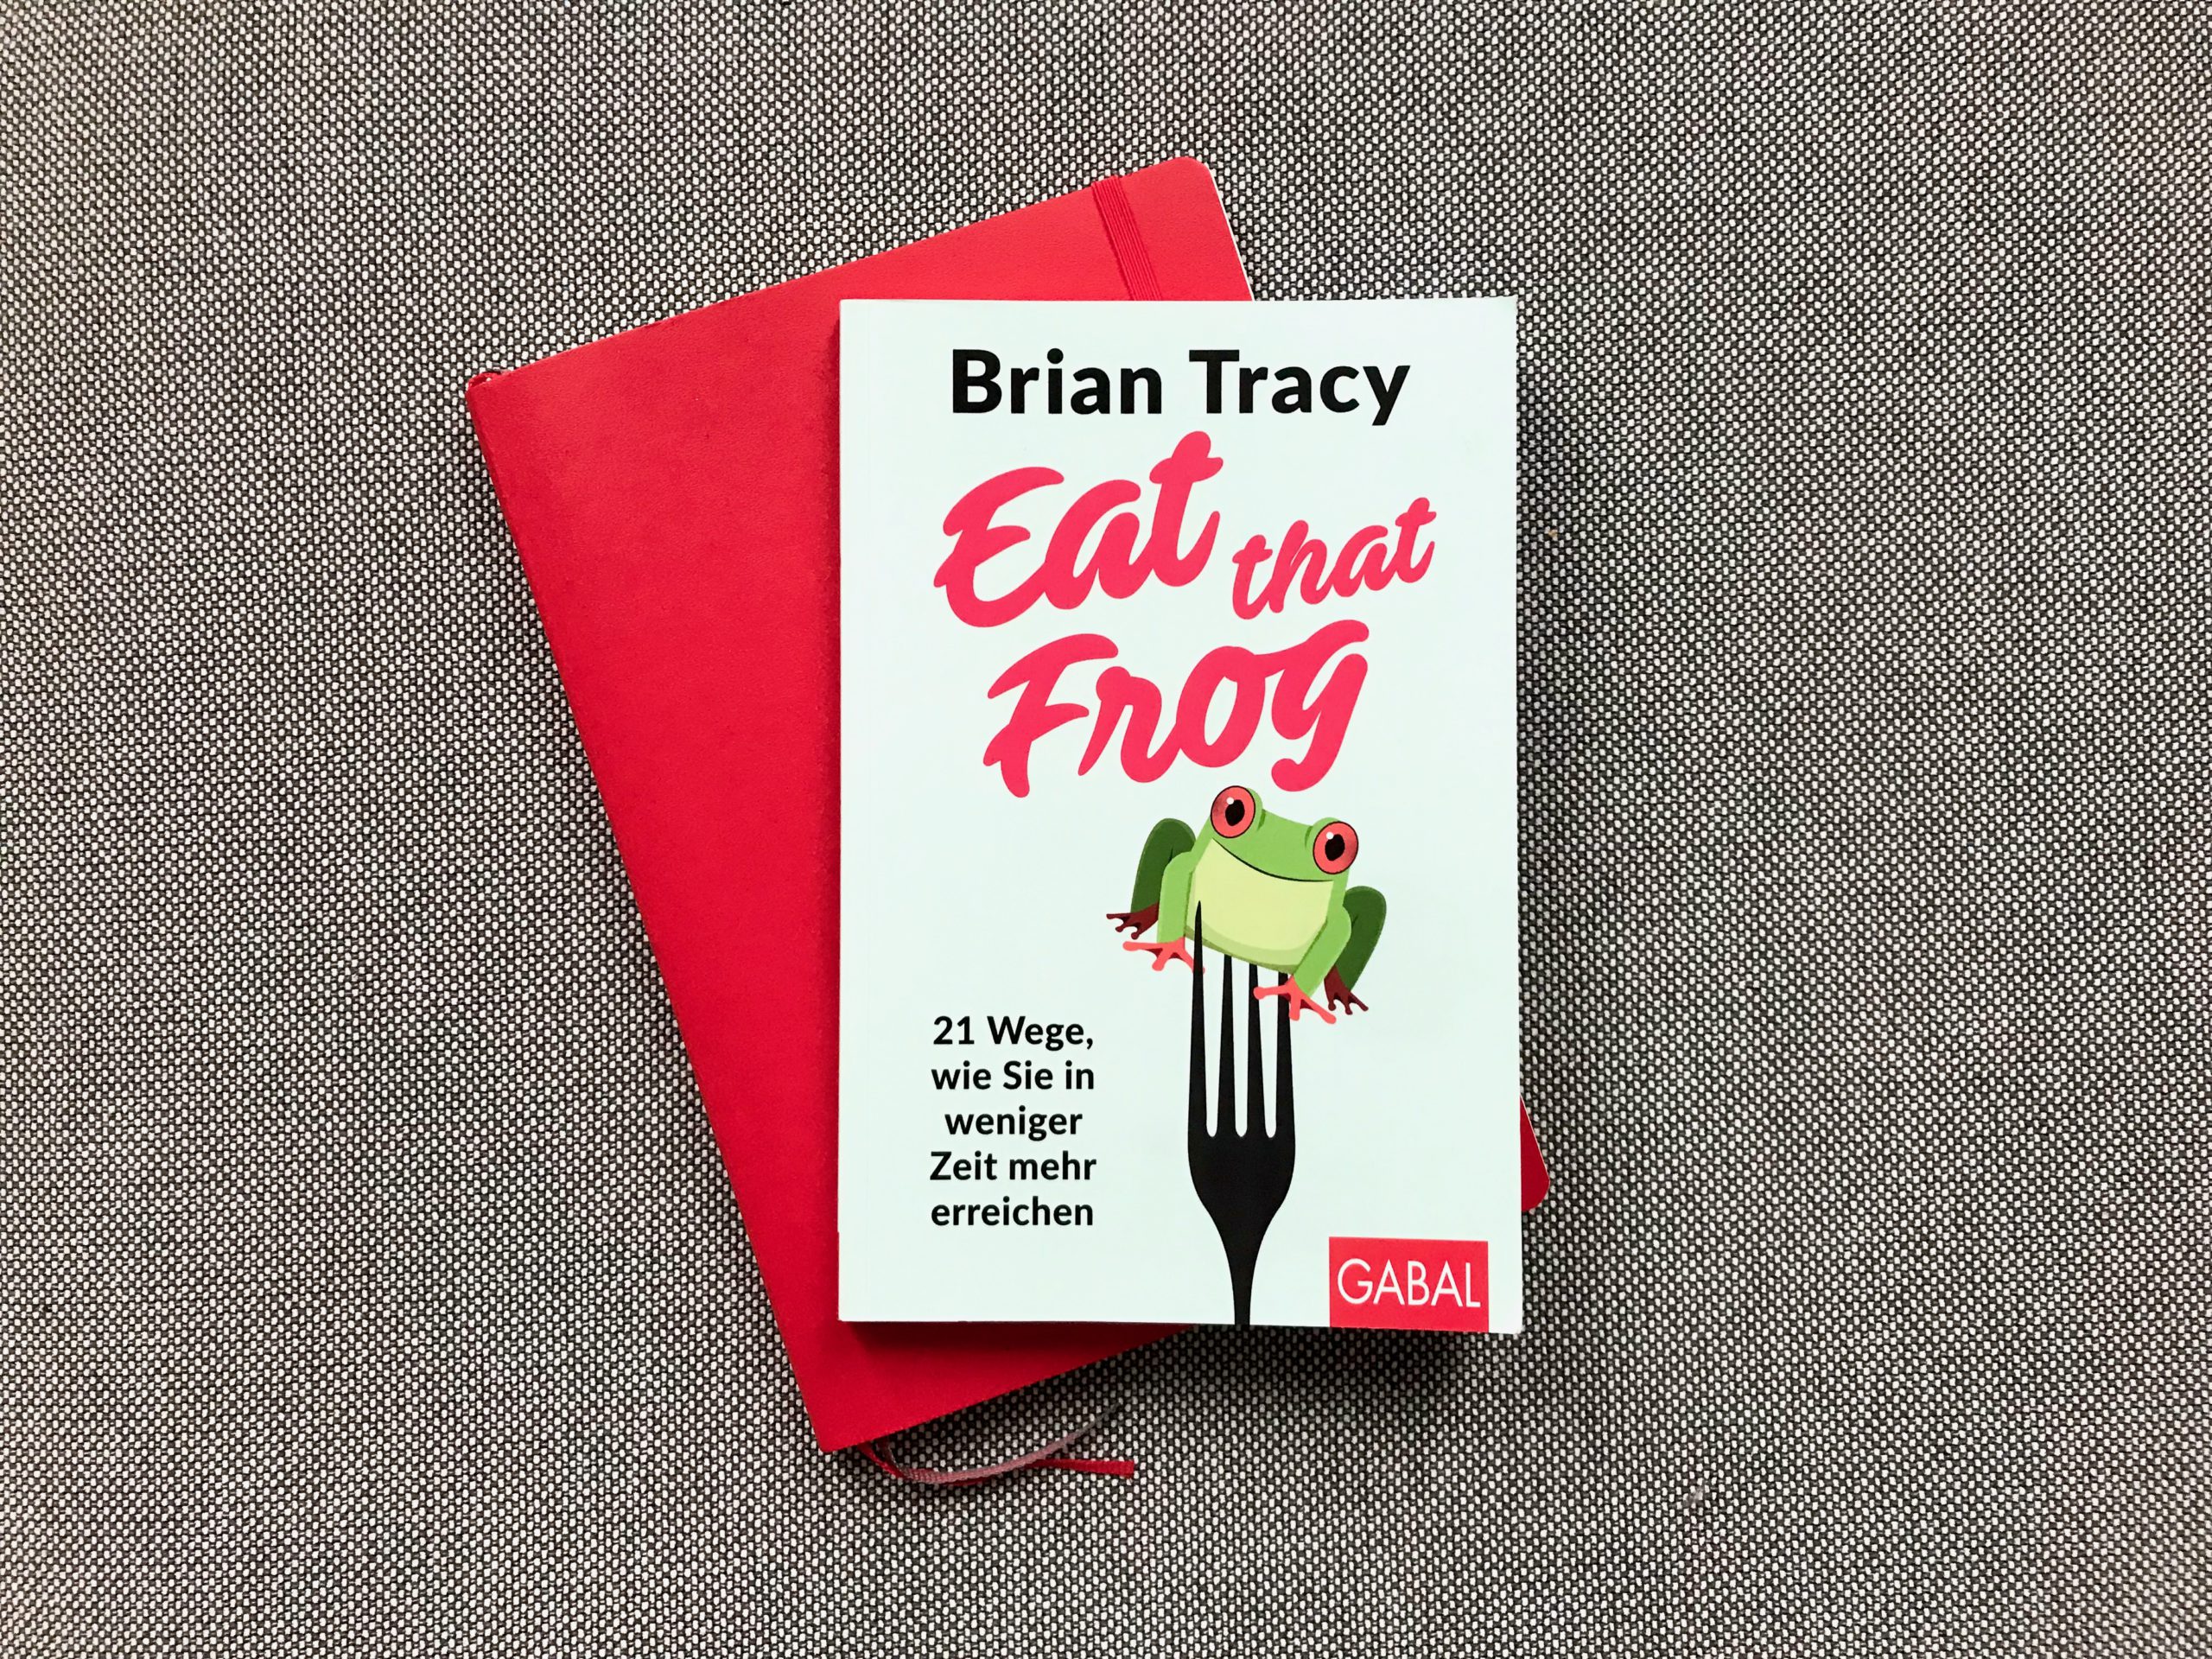 Brian Tracy Eat that frog